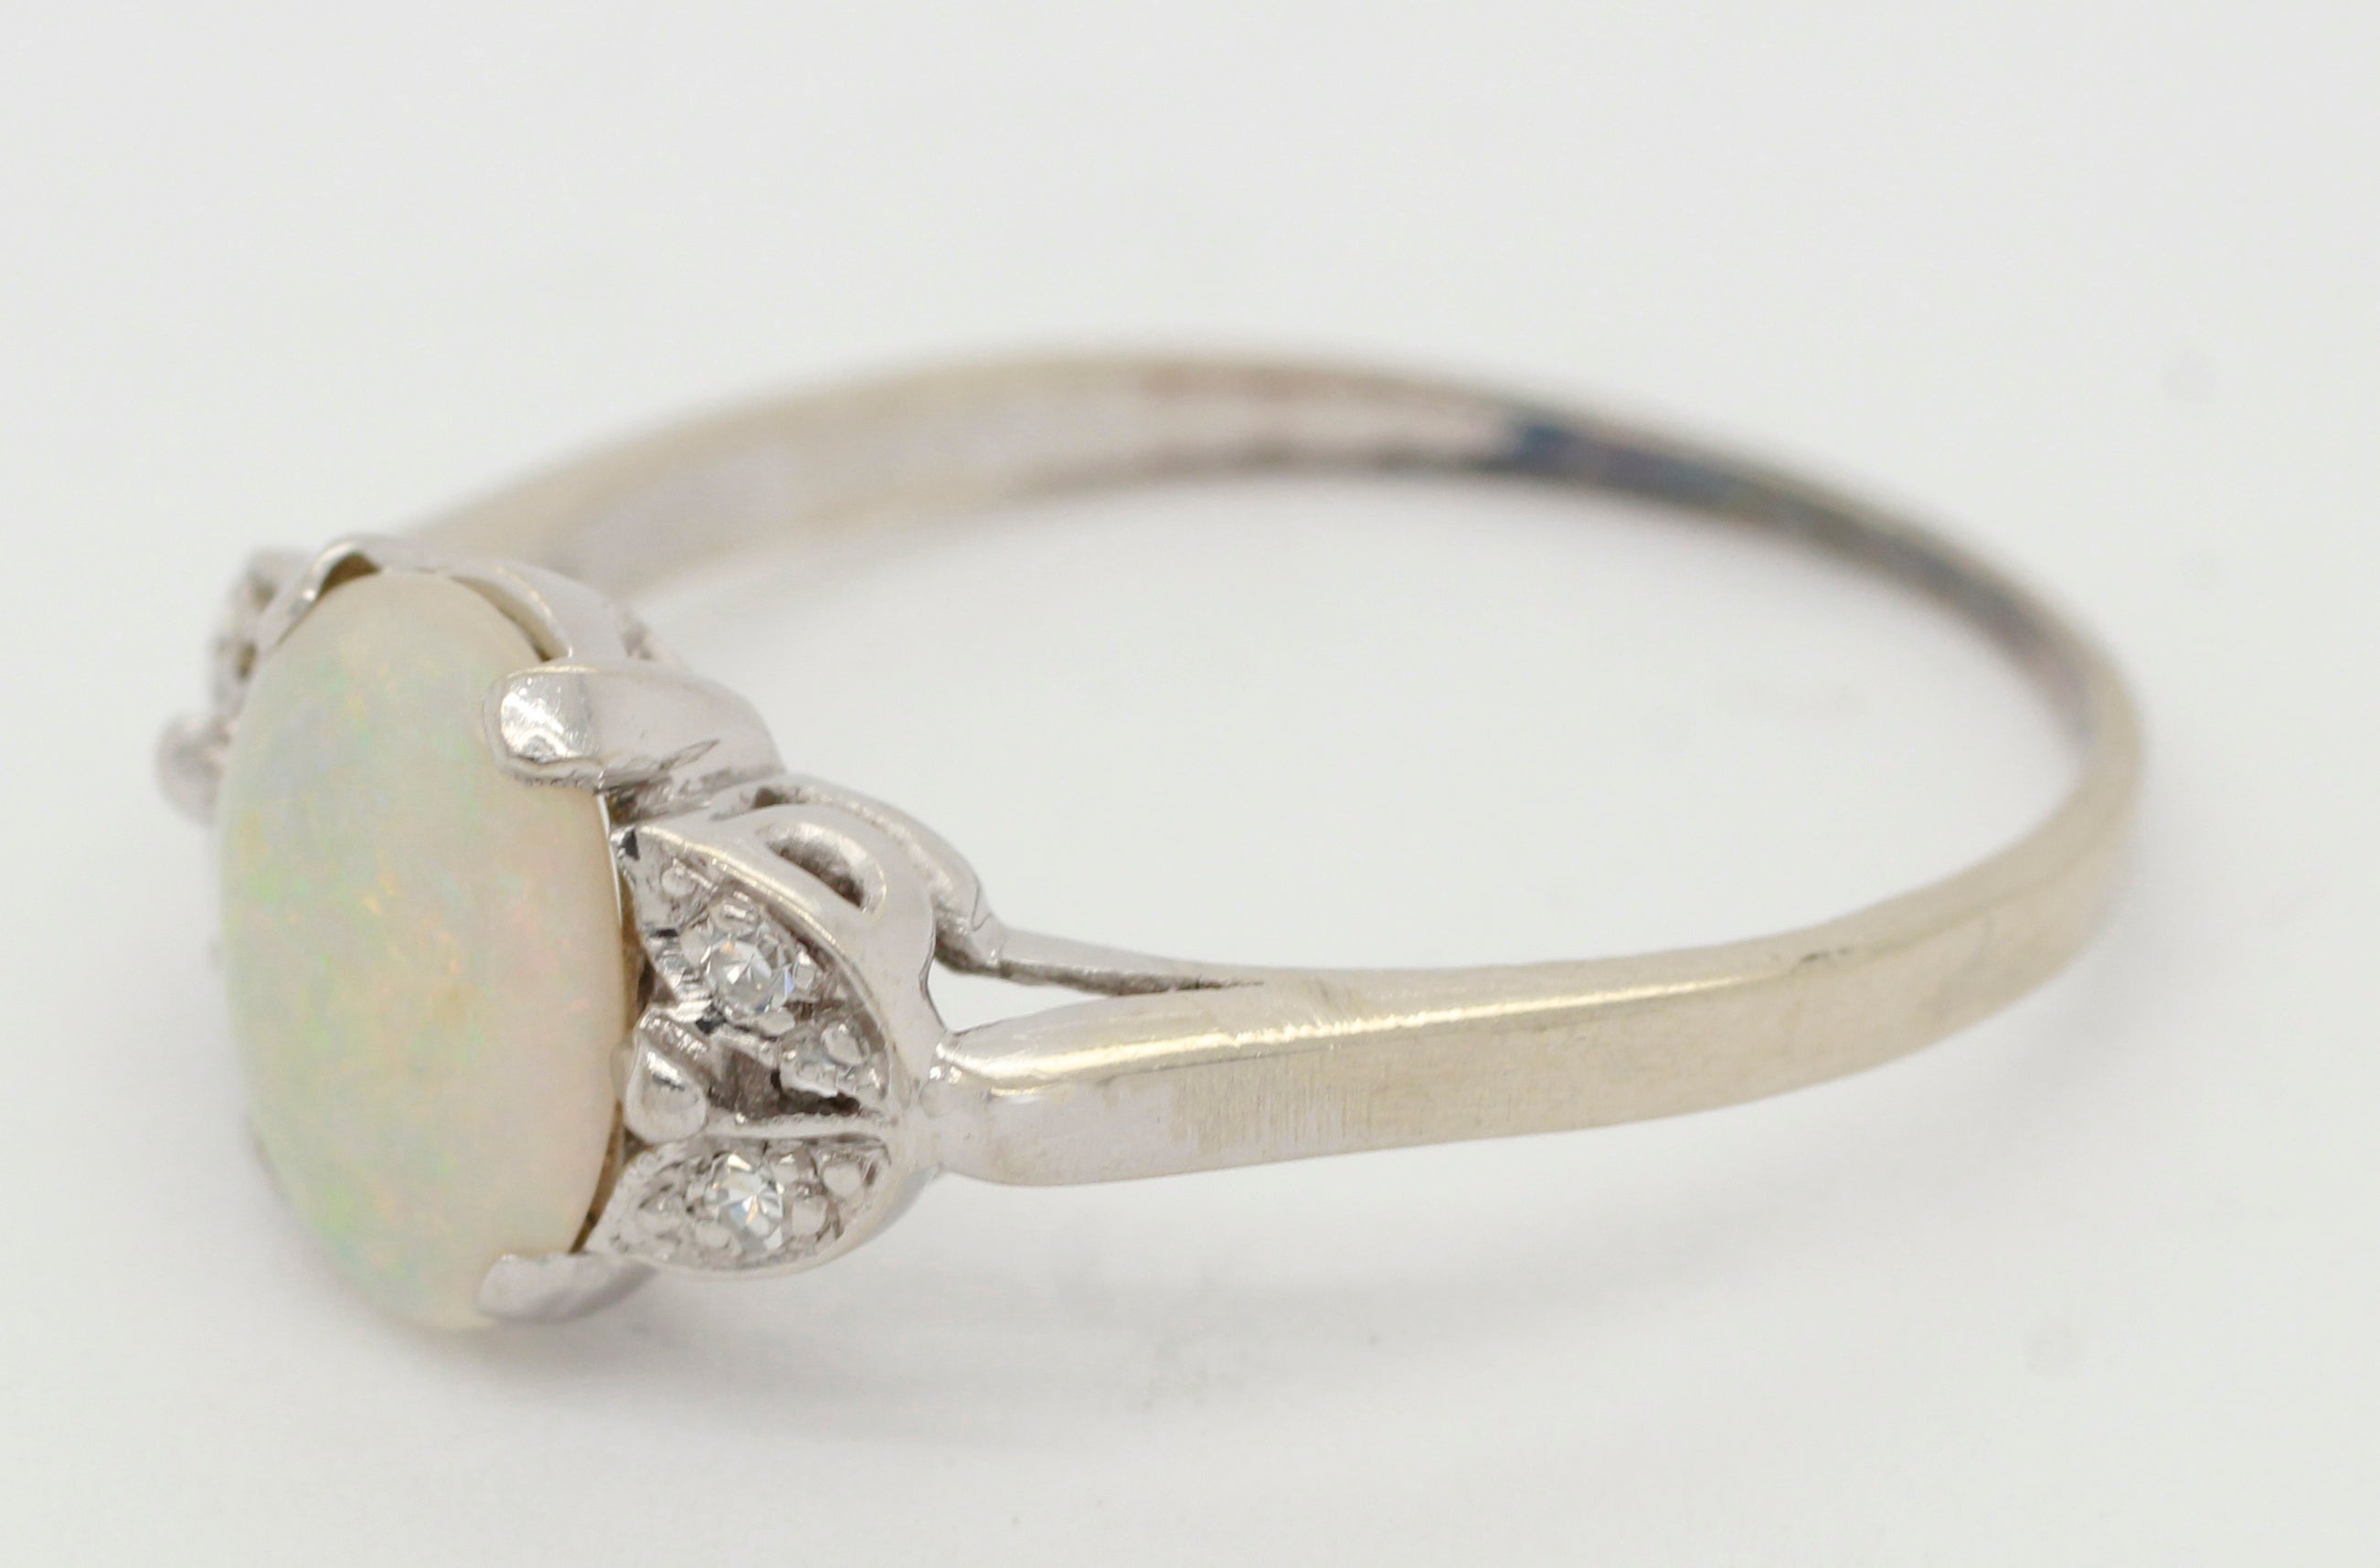 Antique Art Deco White Opal and Diamond Ring in 14k White Gold | Size 8.5